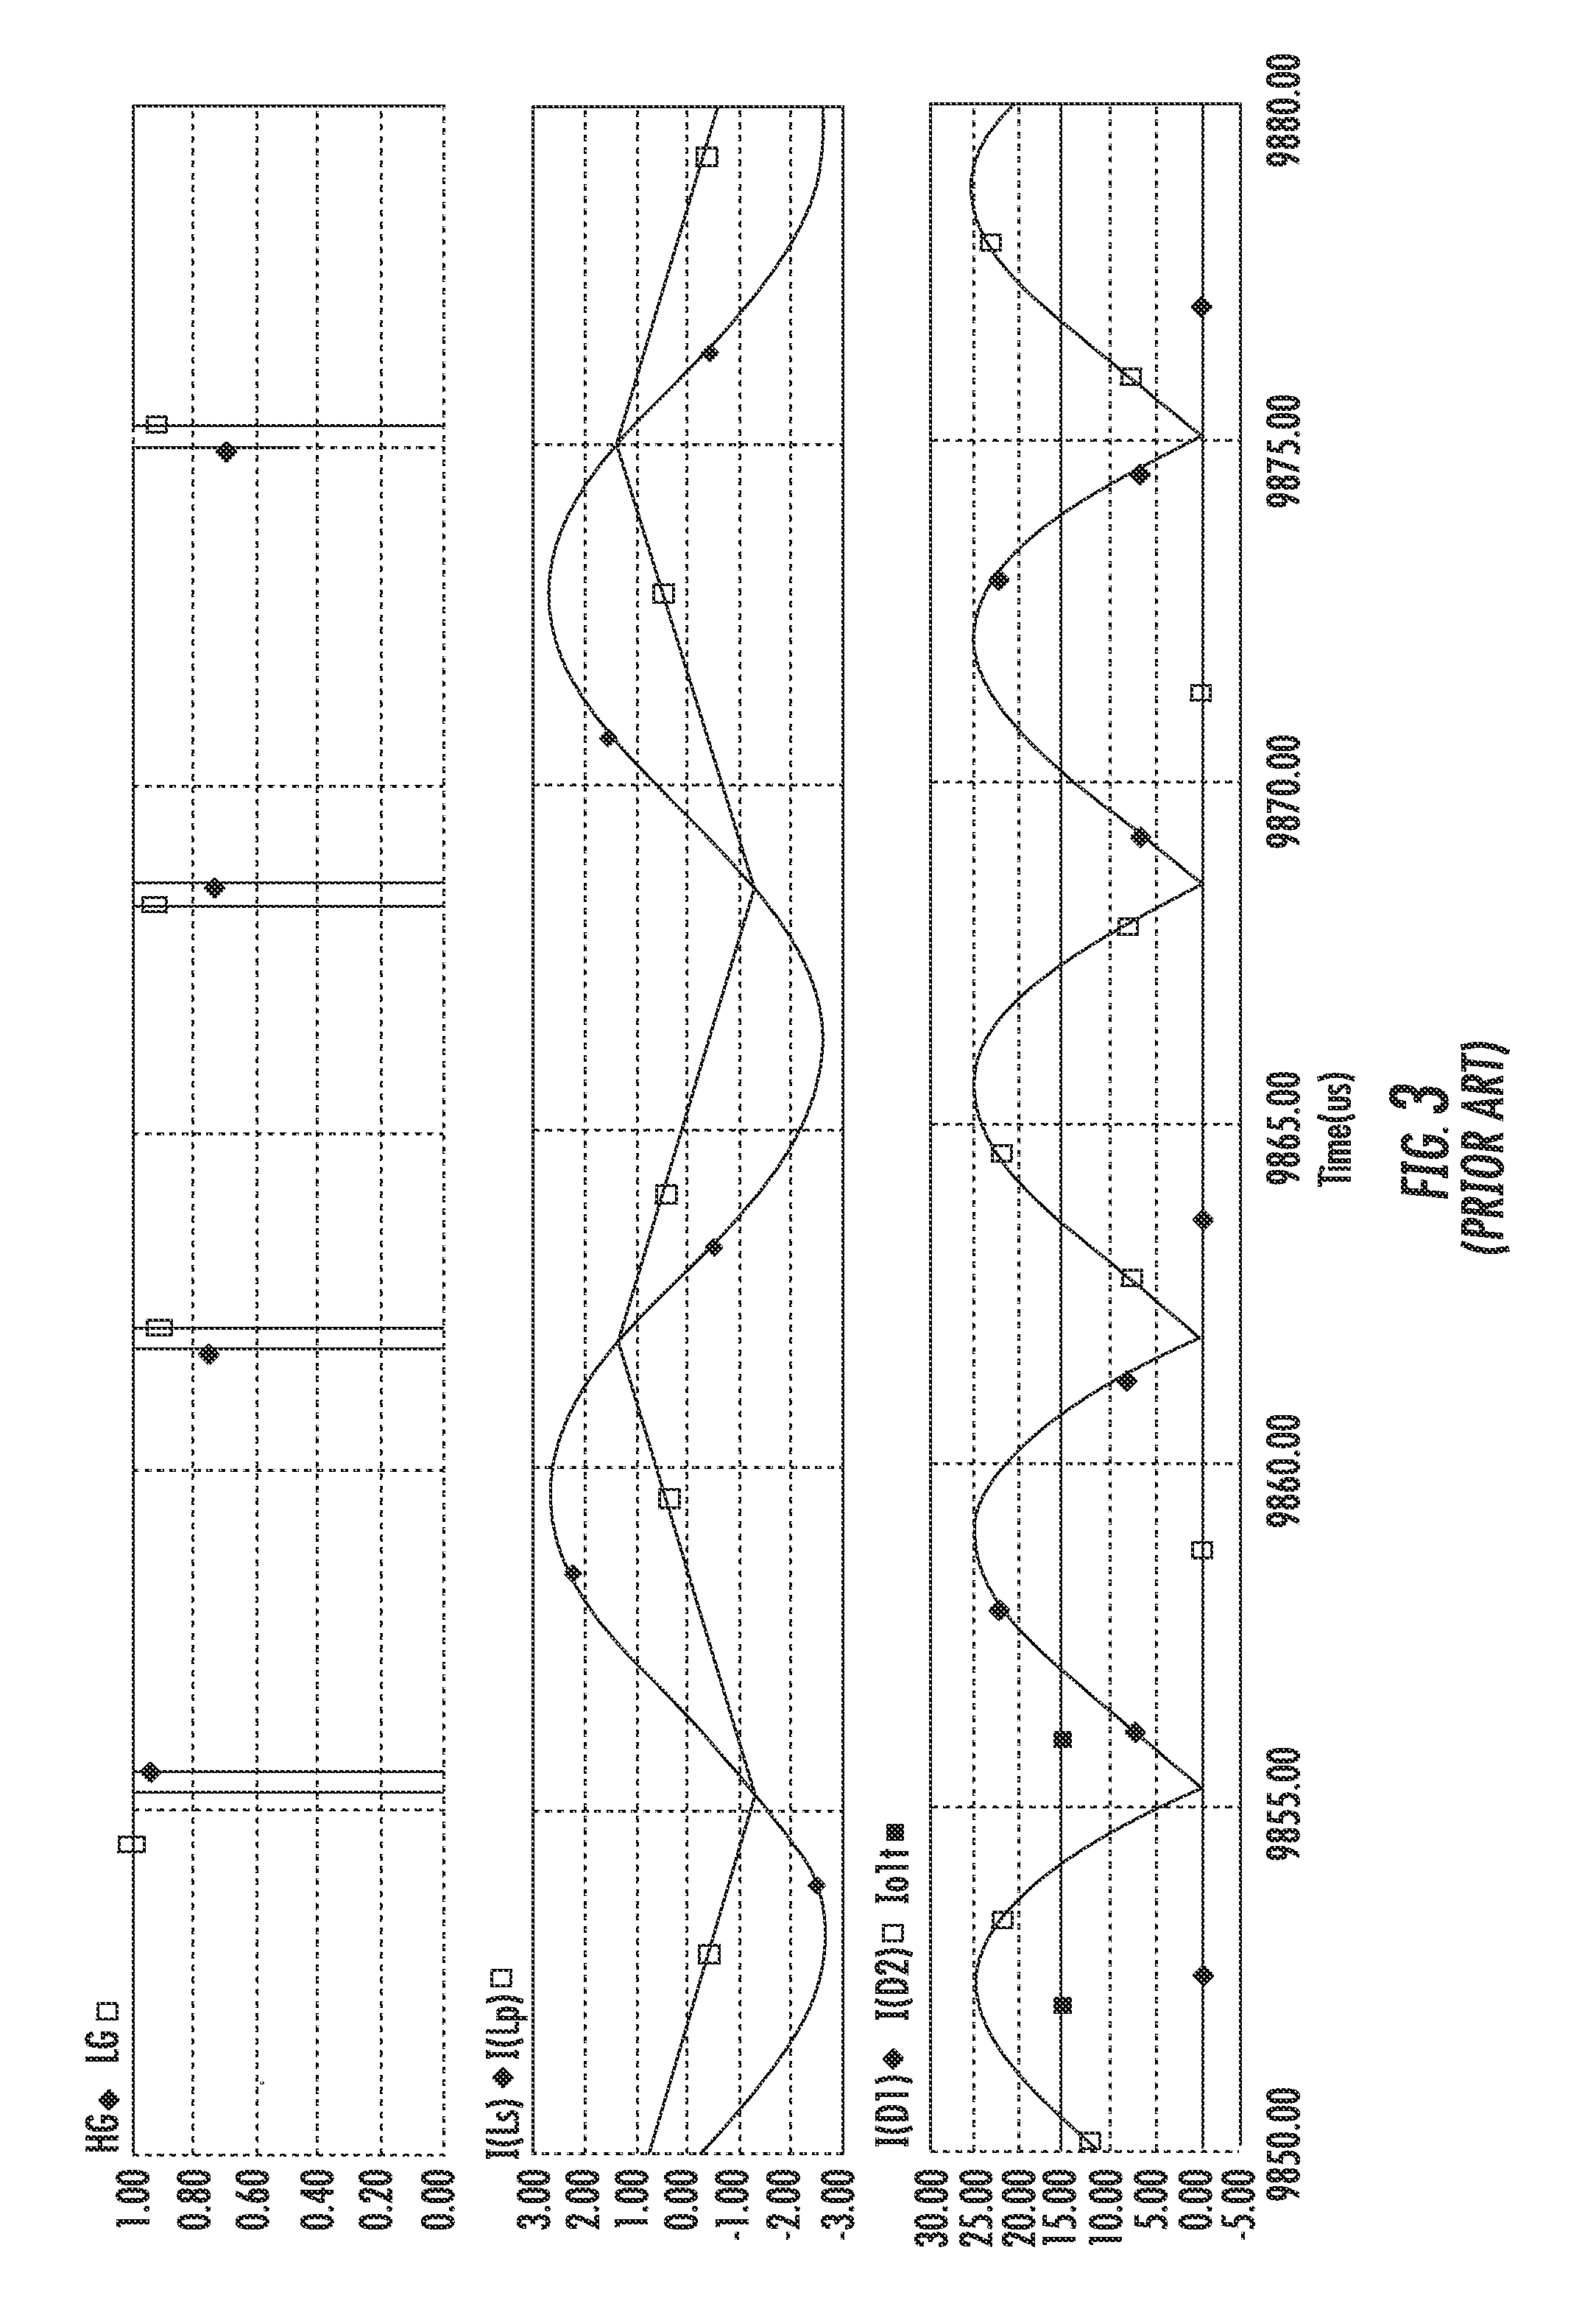 Multi-phase resonant converter and method of controlling it